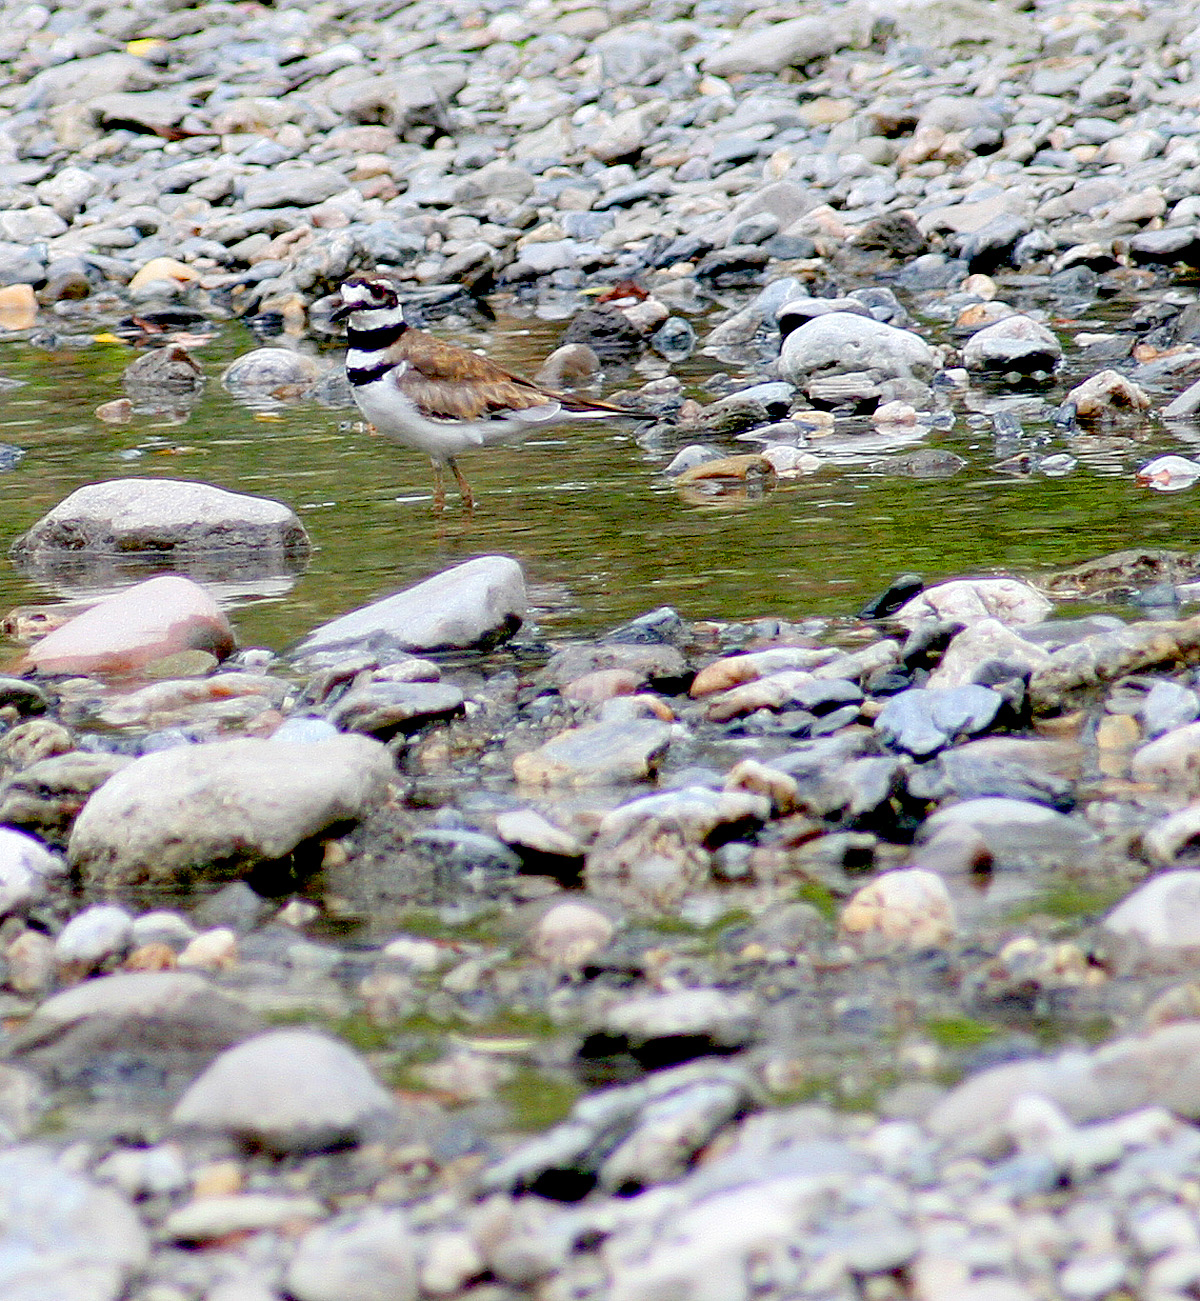 Chevalier grivel / Spotted Sandpiper / Actitis macularia